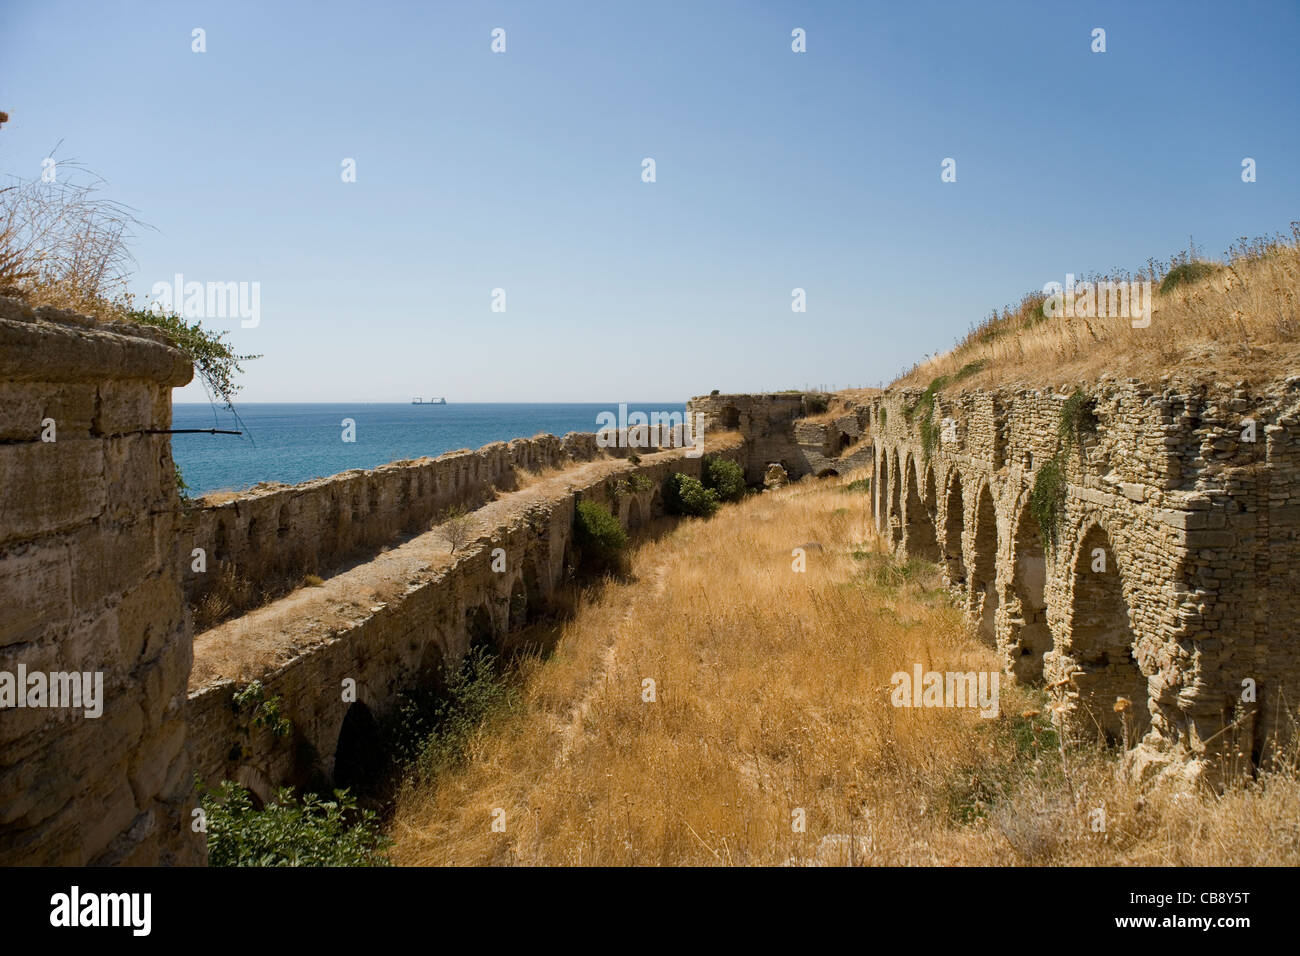 The Seddulbahir fort on the Gallipoli peninsula attacked as part of the 1915 campaign in the First World War,Turkey Stock Photo